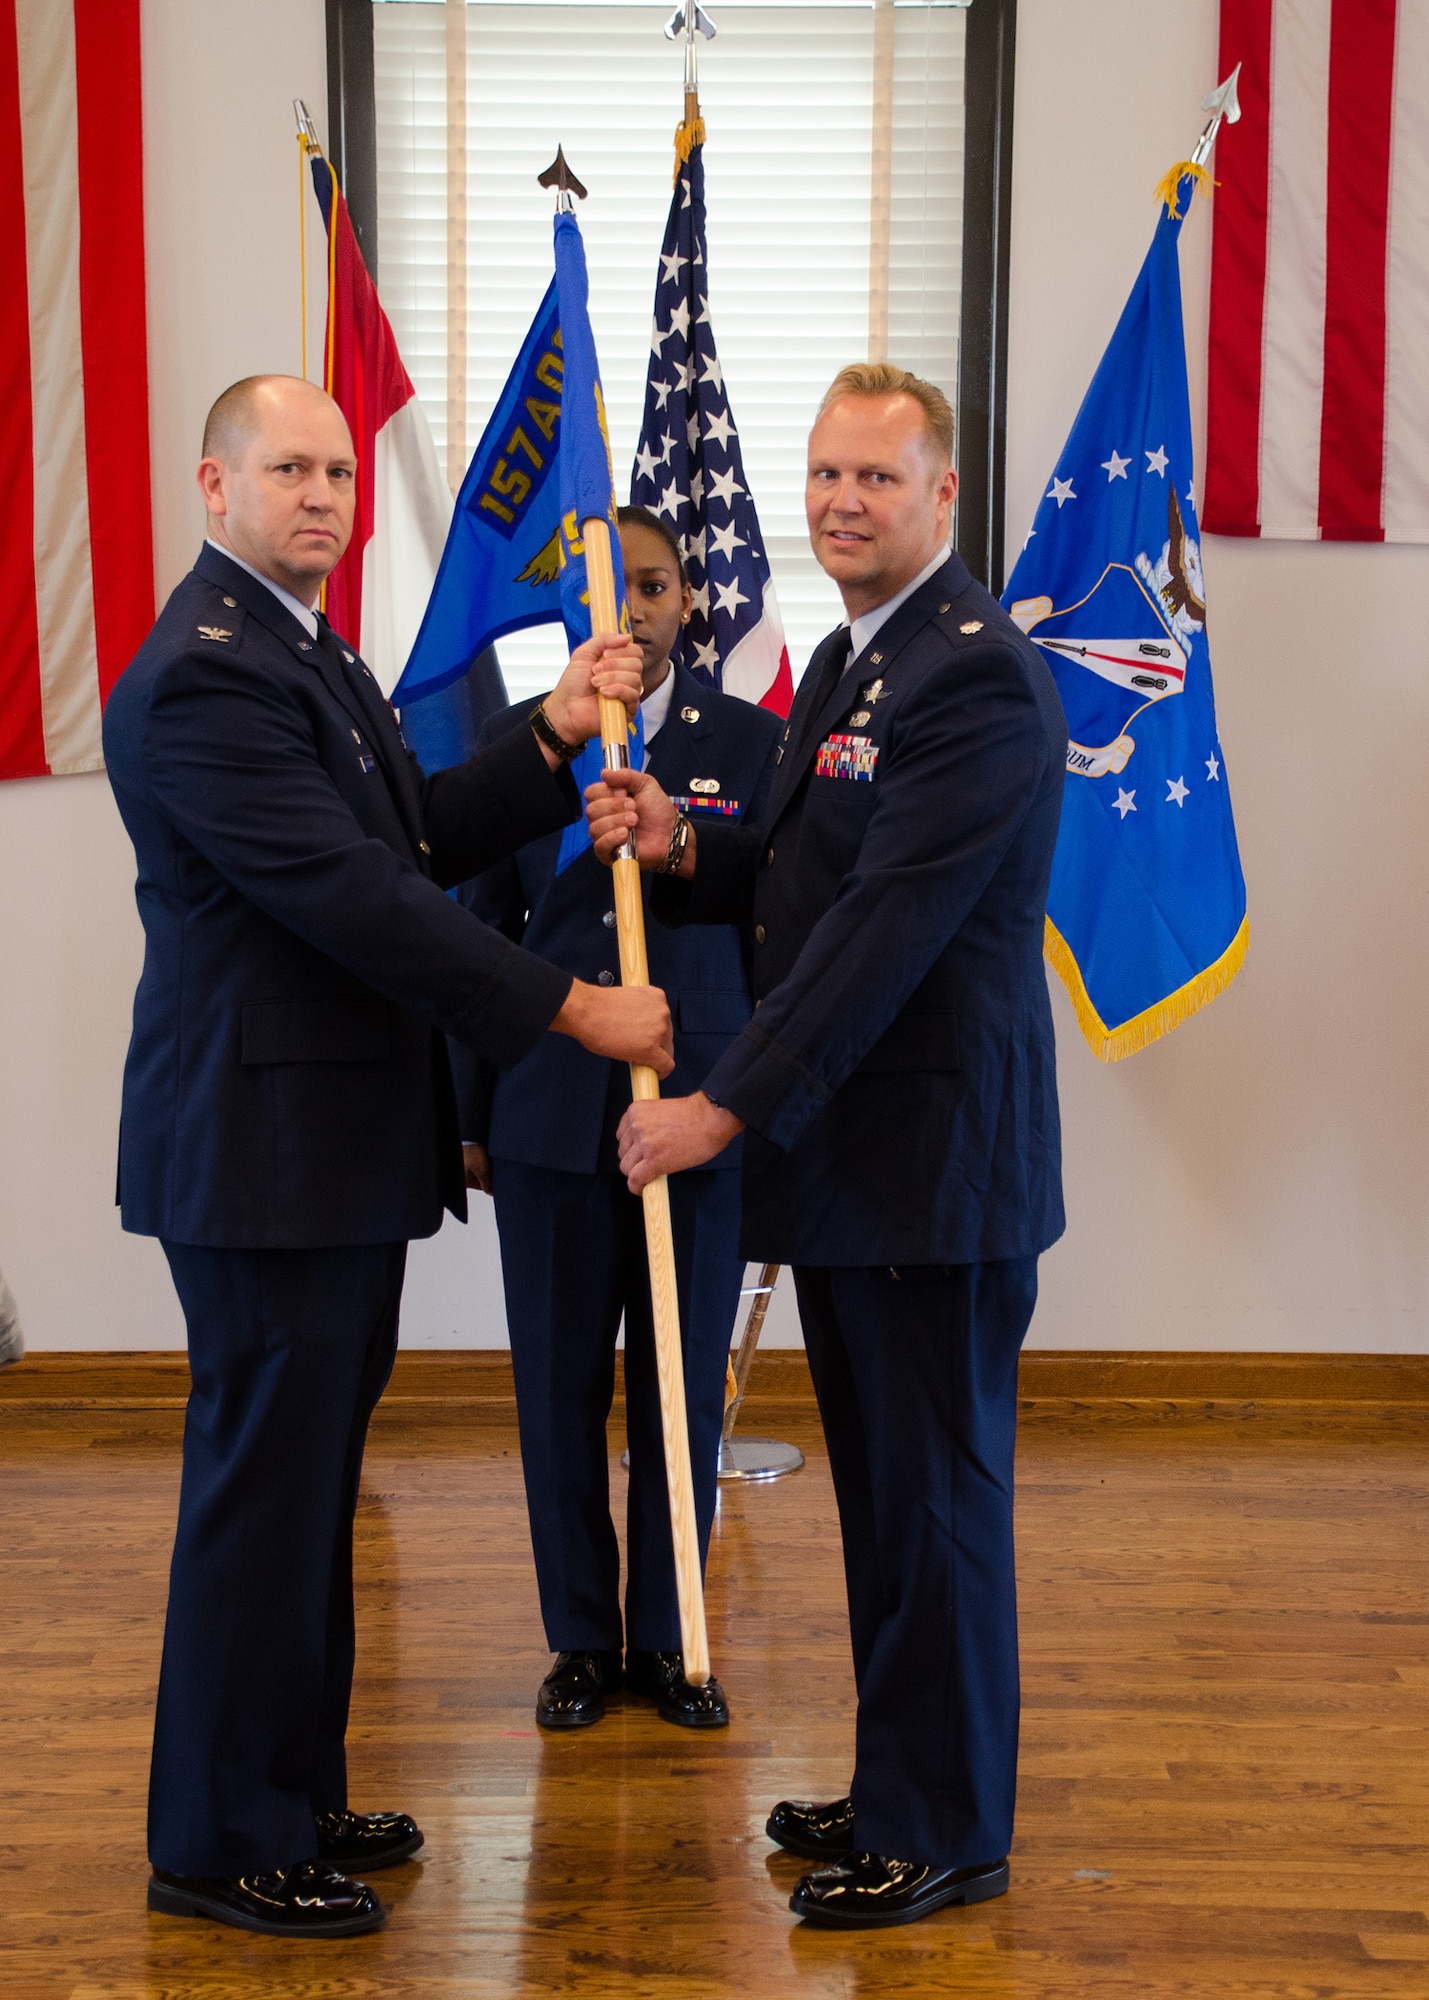 Col. William Boothman, 157th Air Operations Group commander, hands the unit guidon, and with it, leadership authority, to Lt. Col. Thomas Bischoff, 157th Air Communications Squadron commander, at Jefferson Barracks Air National Guard Base, Missouri, during drill Nov. 5, 2016. Three new commanders took charge of three new squadrons -- the 157th ACS, the 157th Air Intelligence Squadron and the 157th Combat Operations Squadron, new units of the 157th AOG -- at a single assumption of command ceremony. (U.S. Air National Guard photo by Staff Sgt. Brittany Cannon)